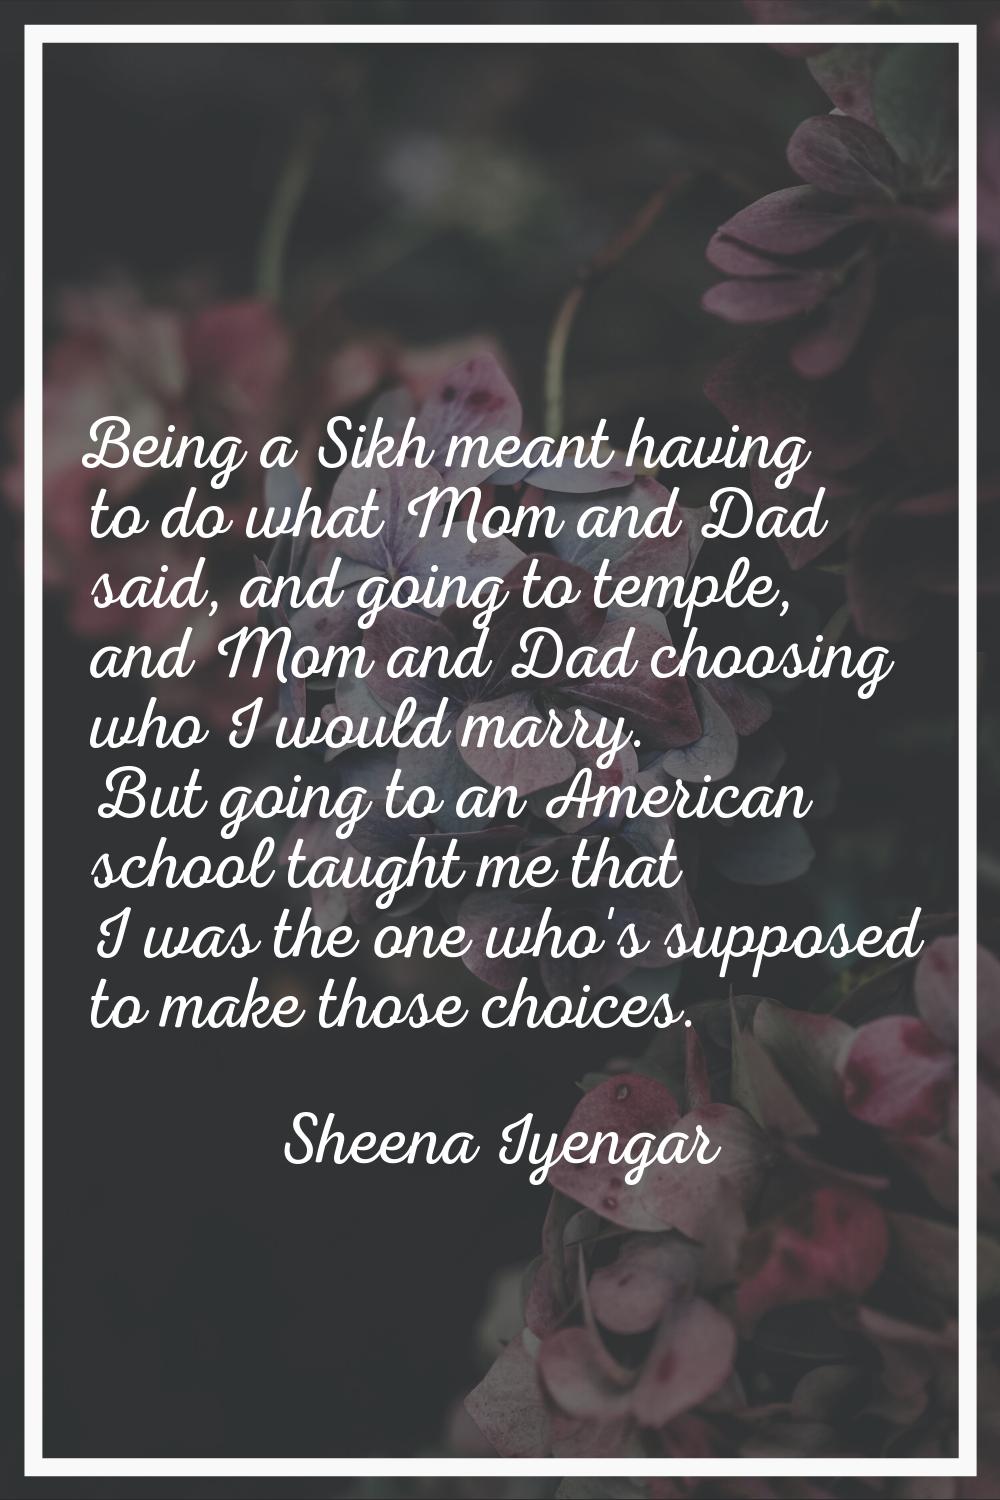 Being a Sikh meant having to do what Mom and Dad said, and going to temple, and Mom and Dad choosin